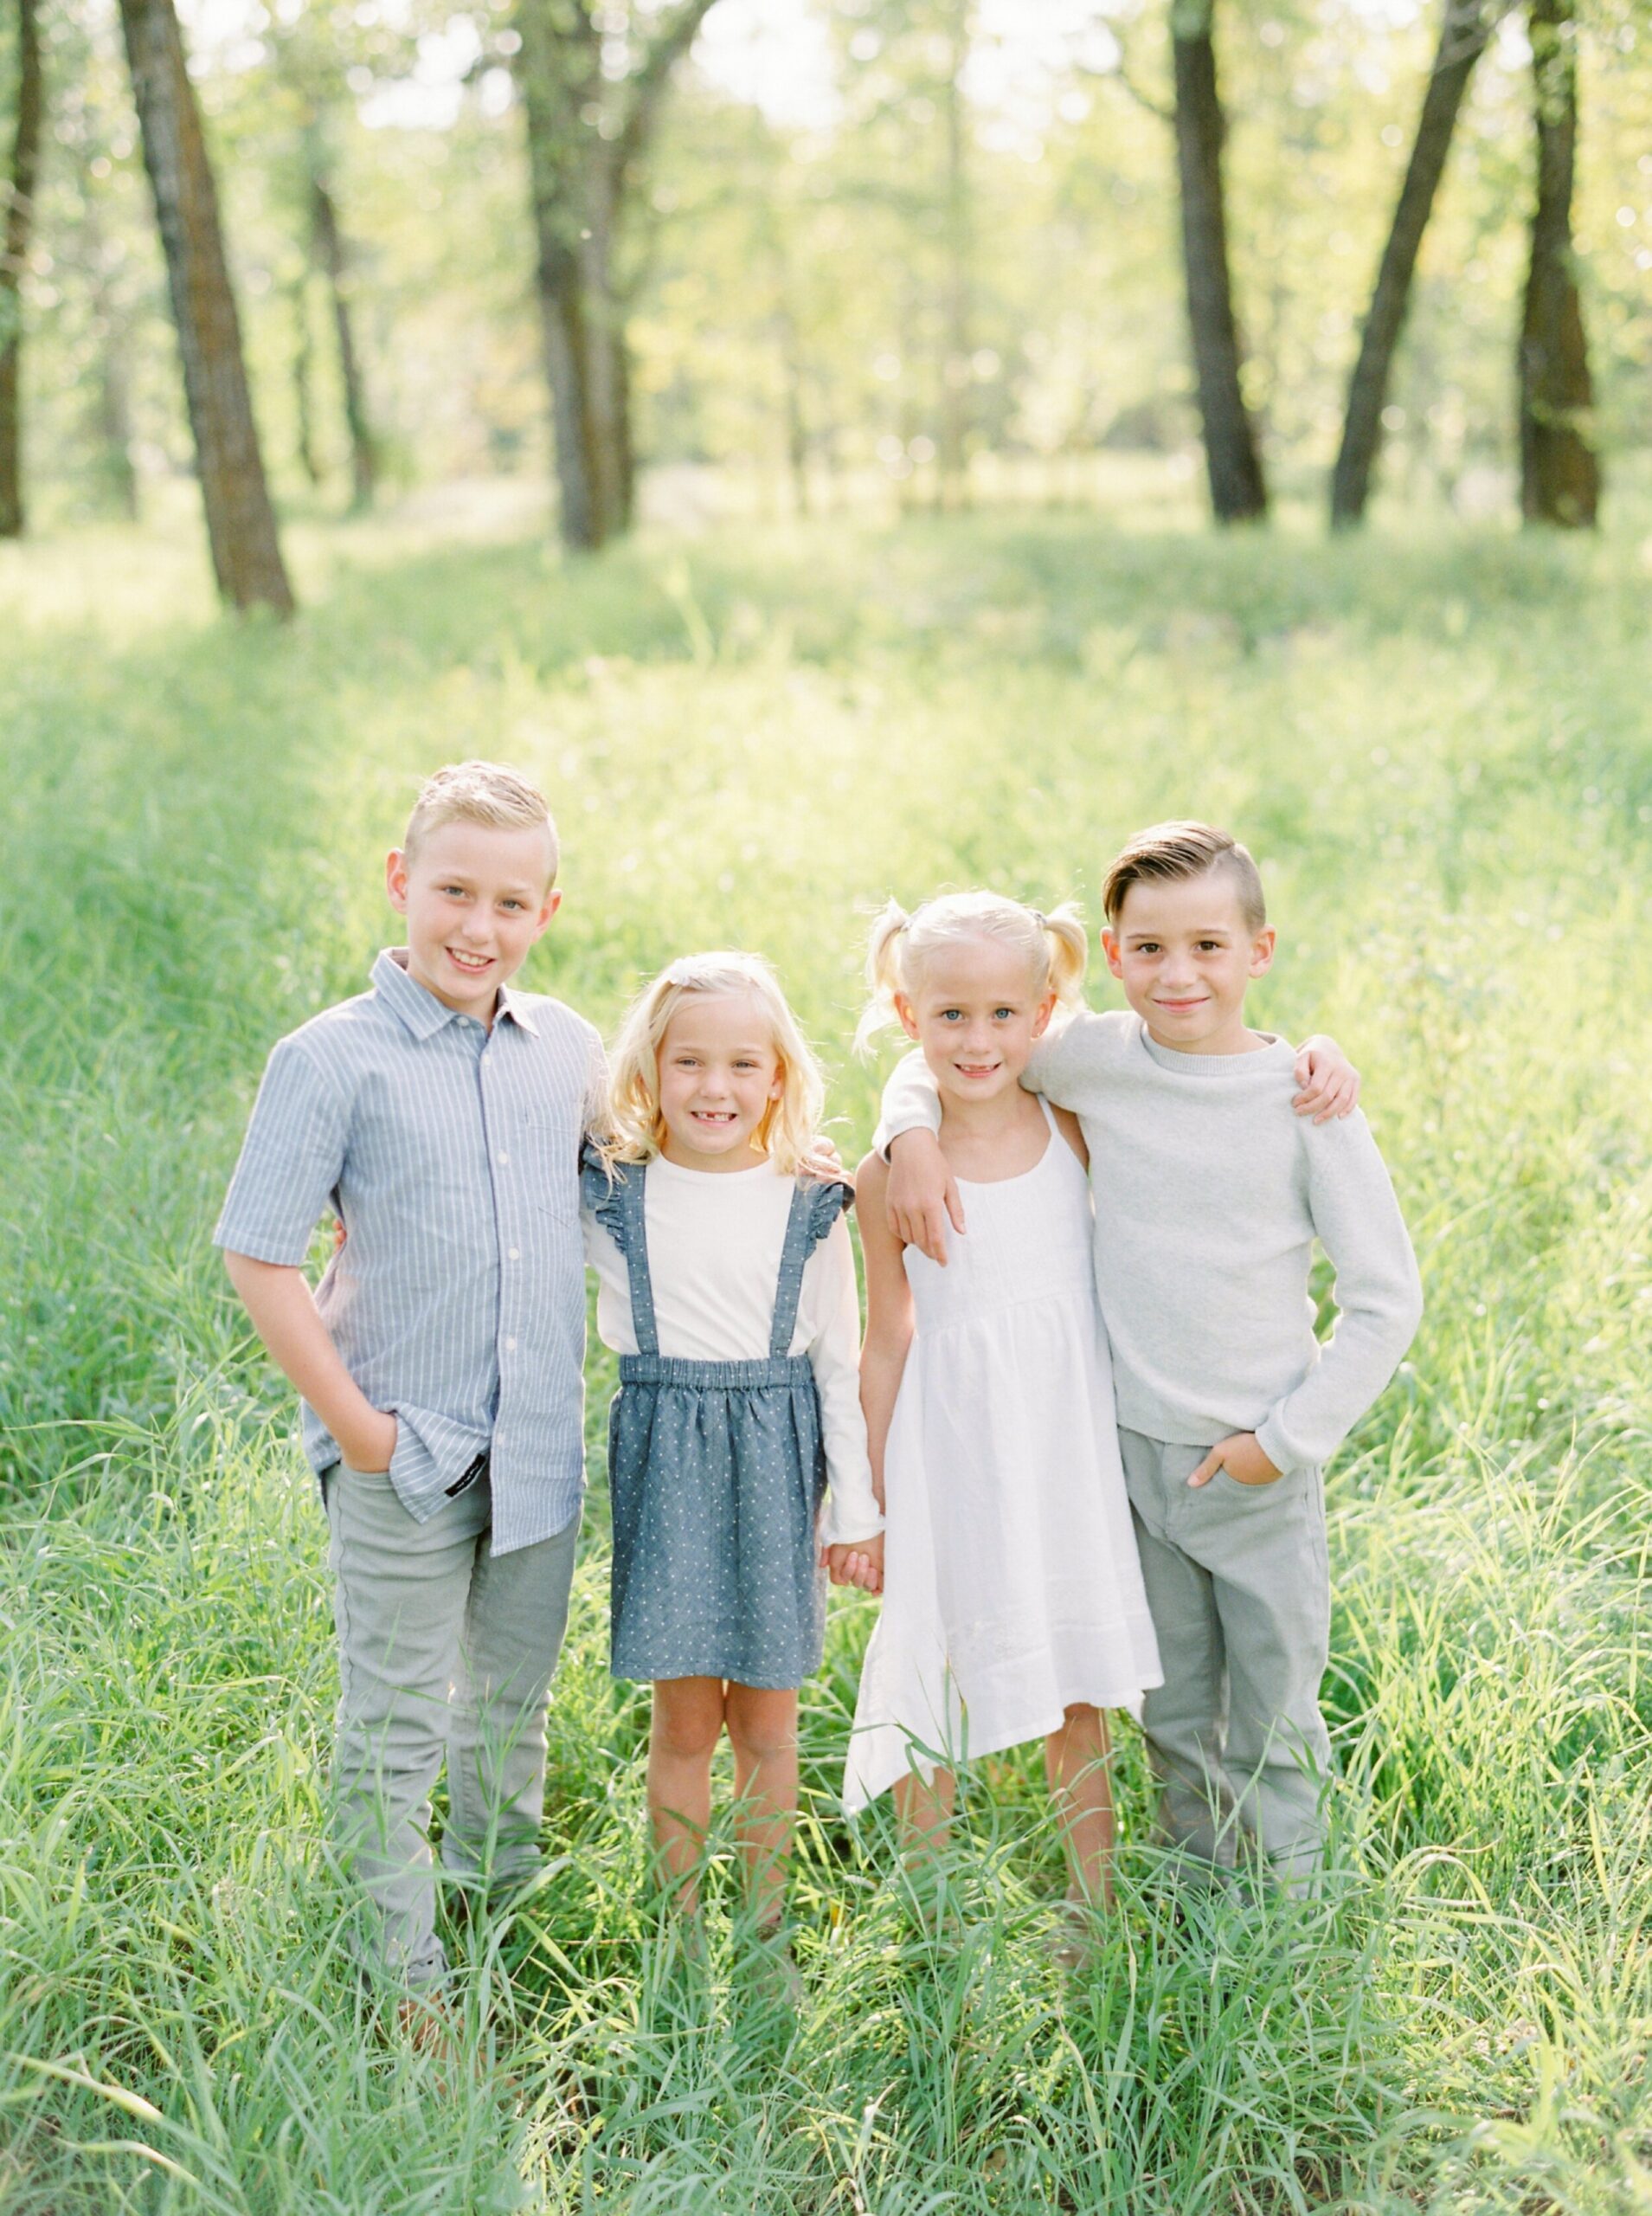 family photo outfit inspiration blues and greys and light neutrals